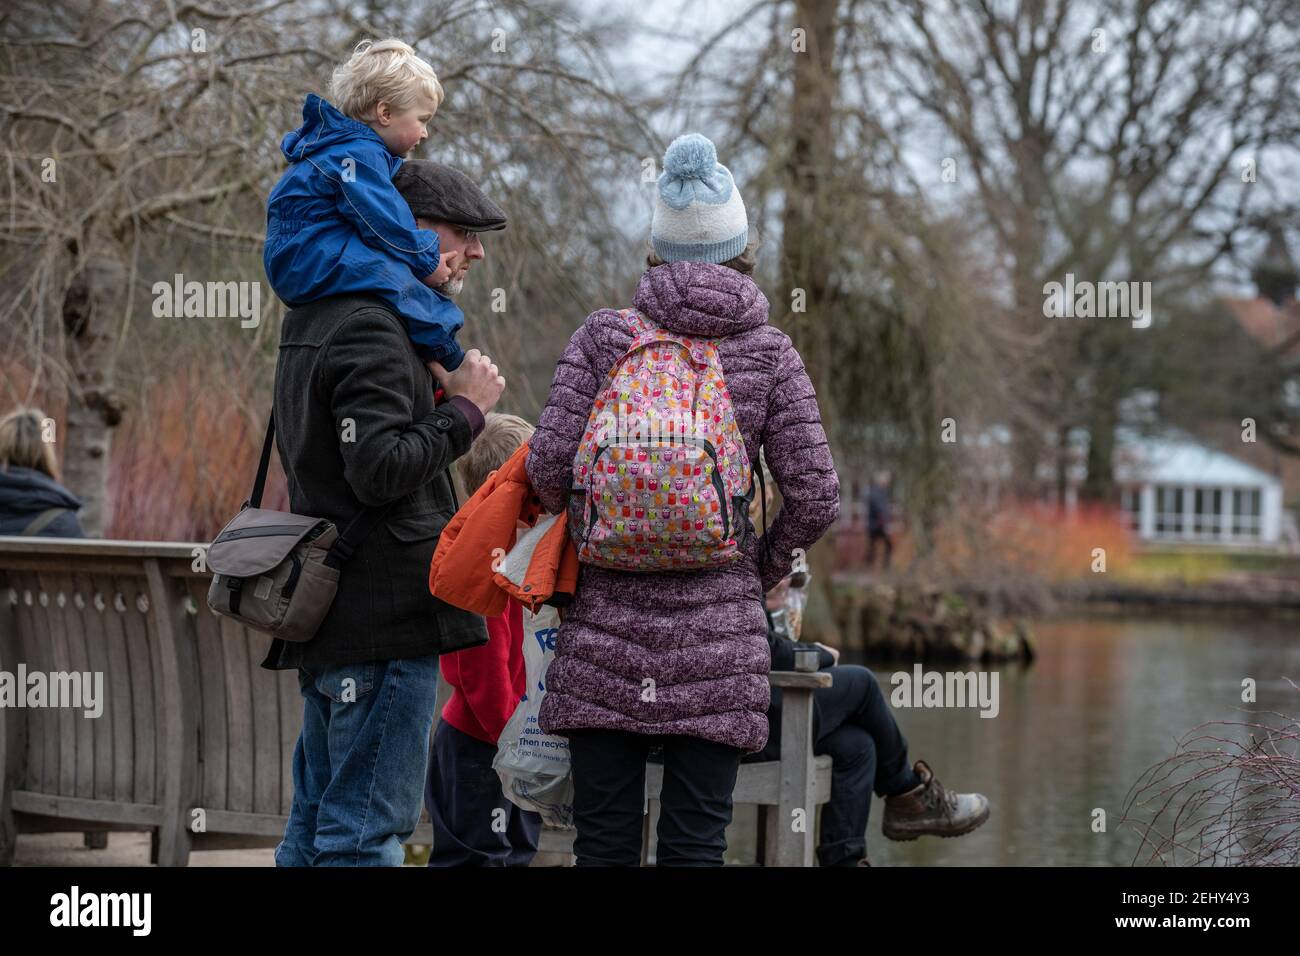 Families enjoying the early signs of Spring at RHS Garden Wisley, Surrey England, United Kingdom Stock Photo